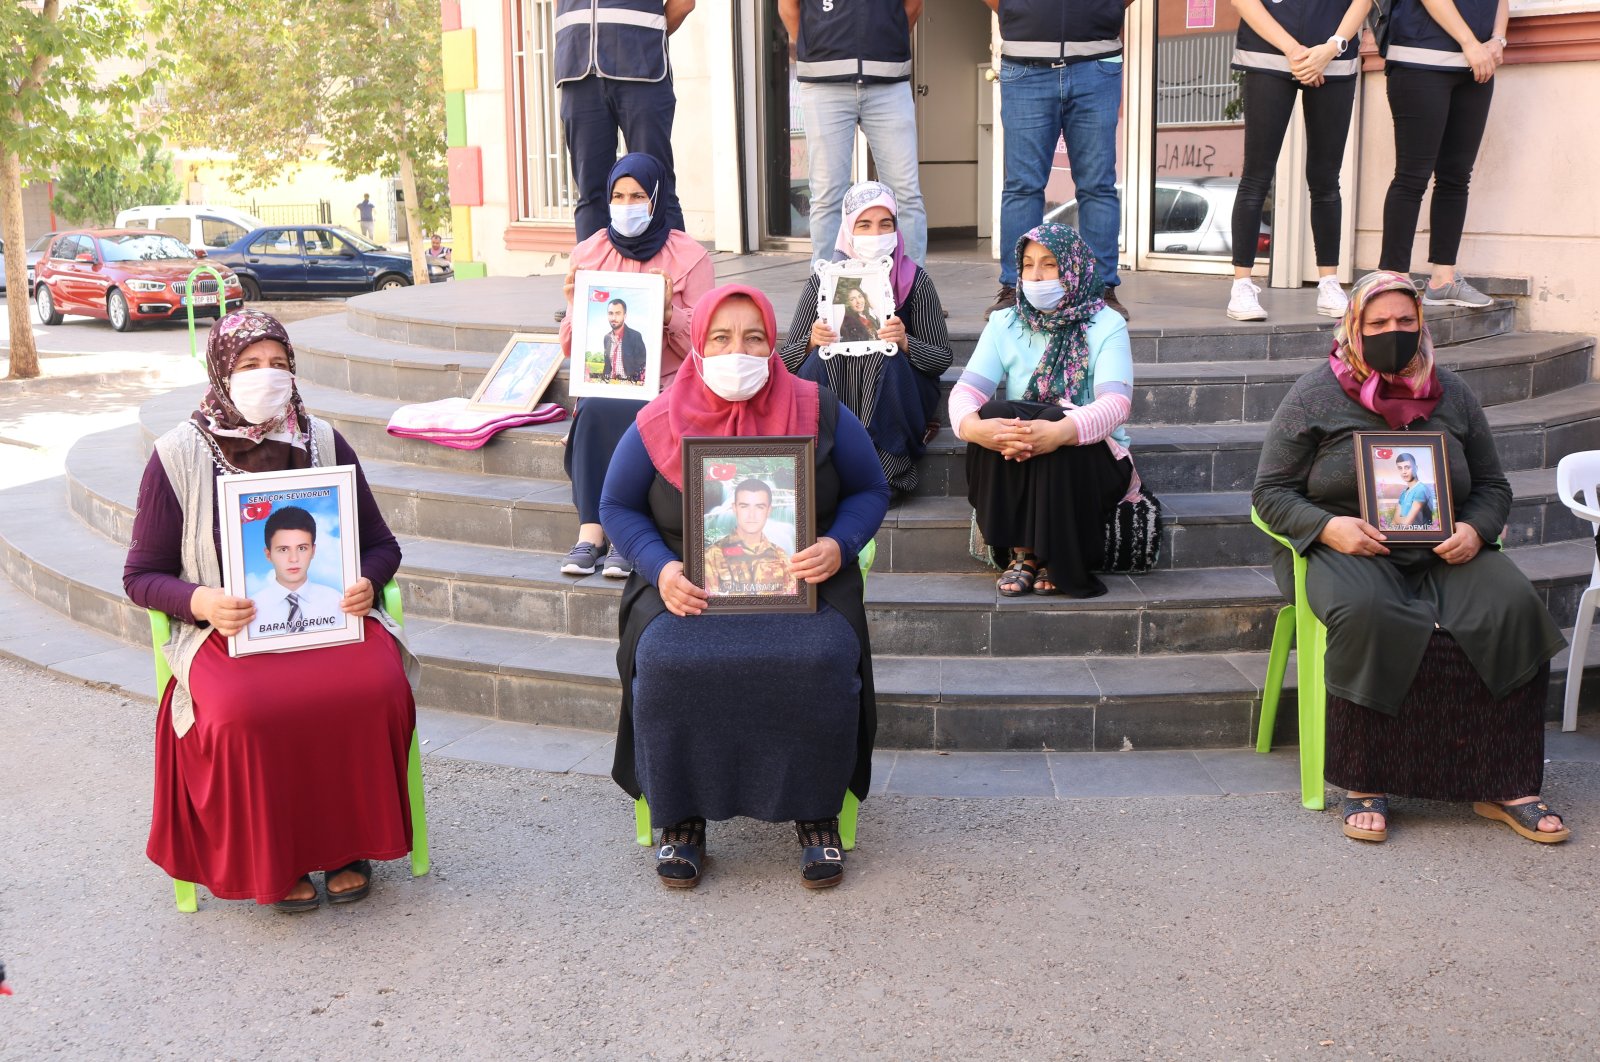 Families participate in the yearlong sit-in protest against the PKK terrorist group in front of the pro-PKK Peoples’ Democratic Party's (HDP) headquarters in southeastern Turkey’s Diyarbakır, Sept.16, 2020 (IHA Photo)